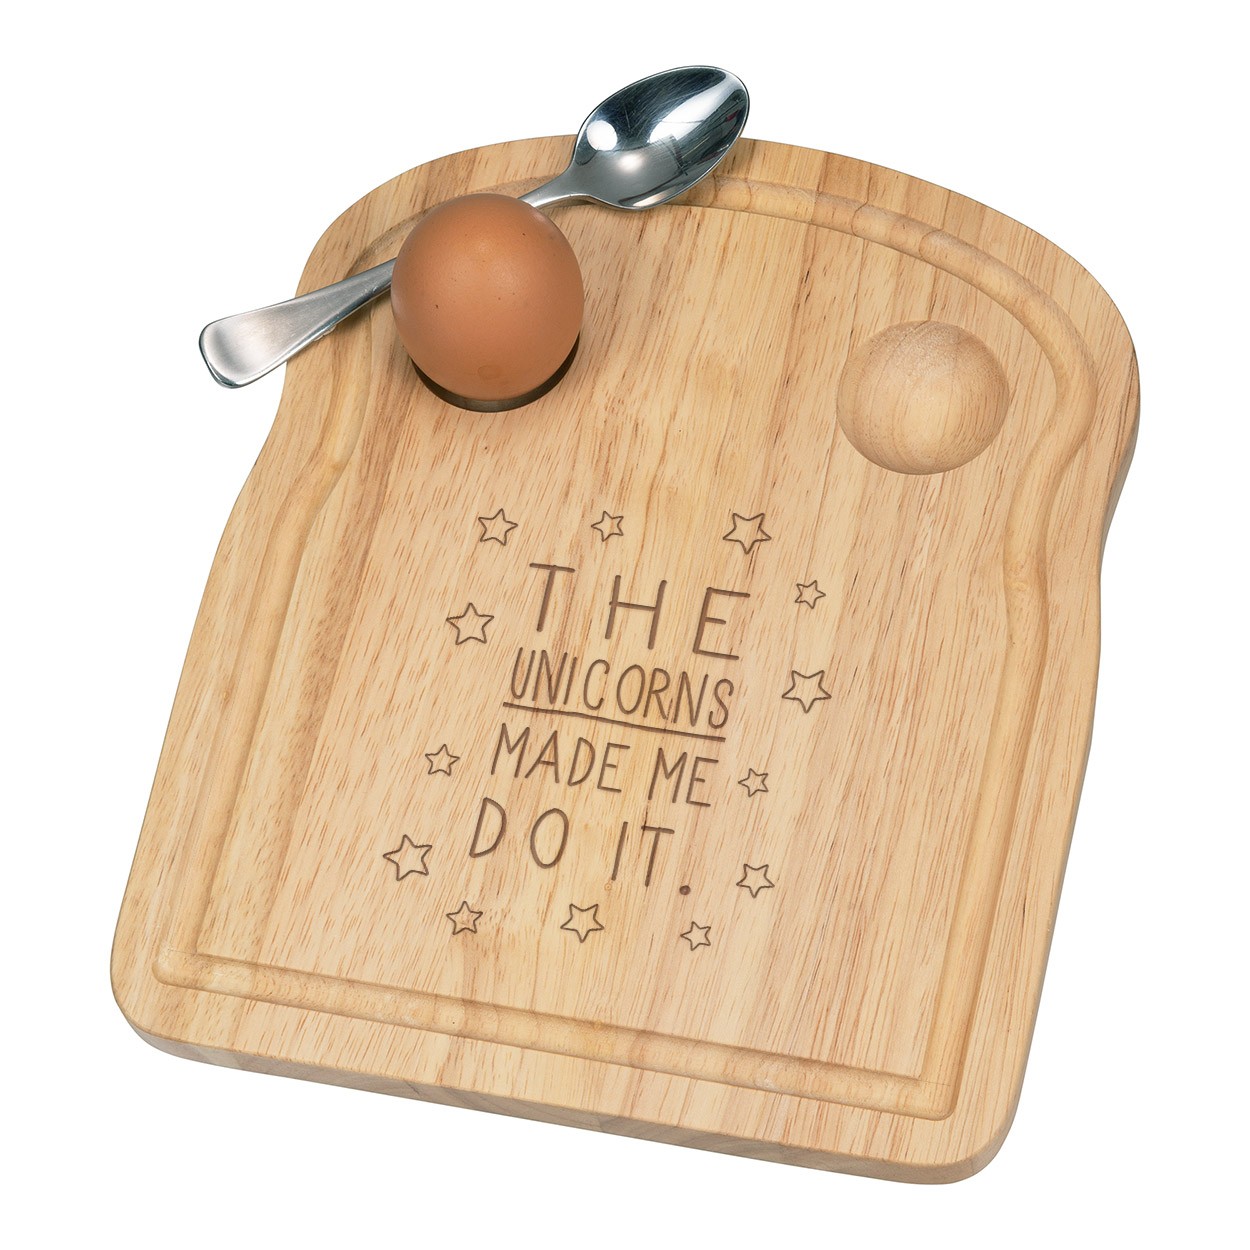 The Unicorns Made Me Do It Breakfast Dippy Egg Cup Board Wooden